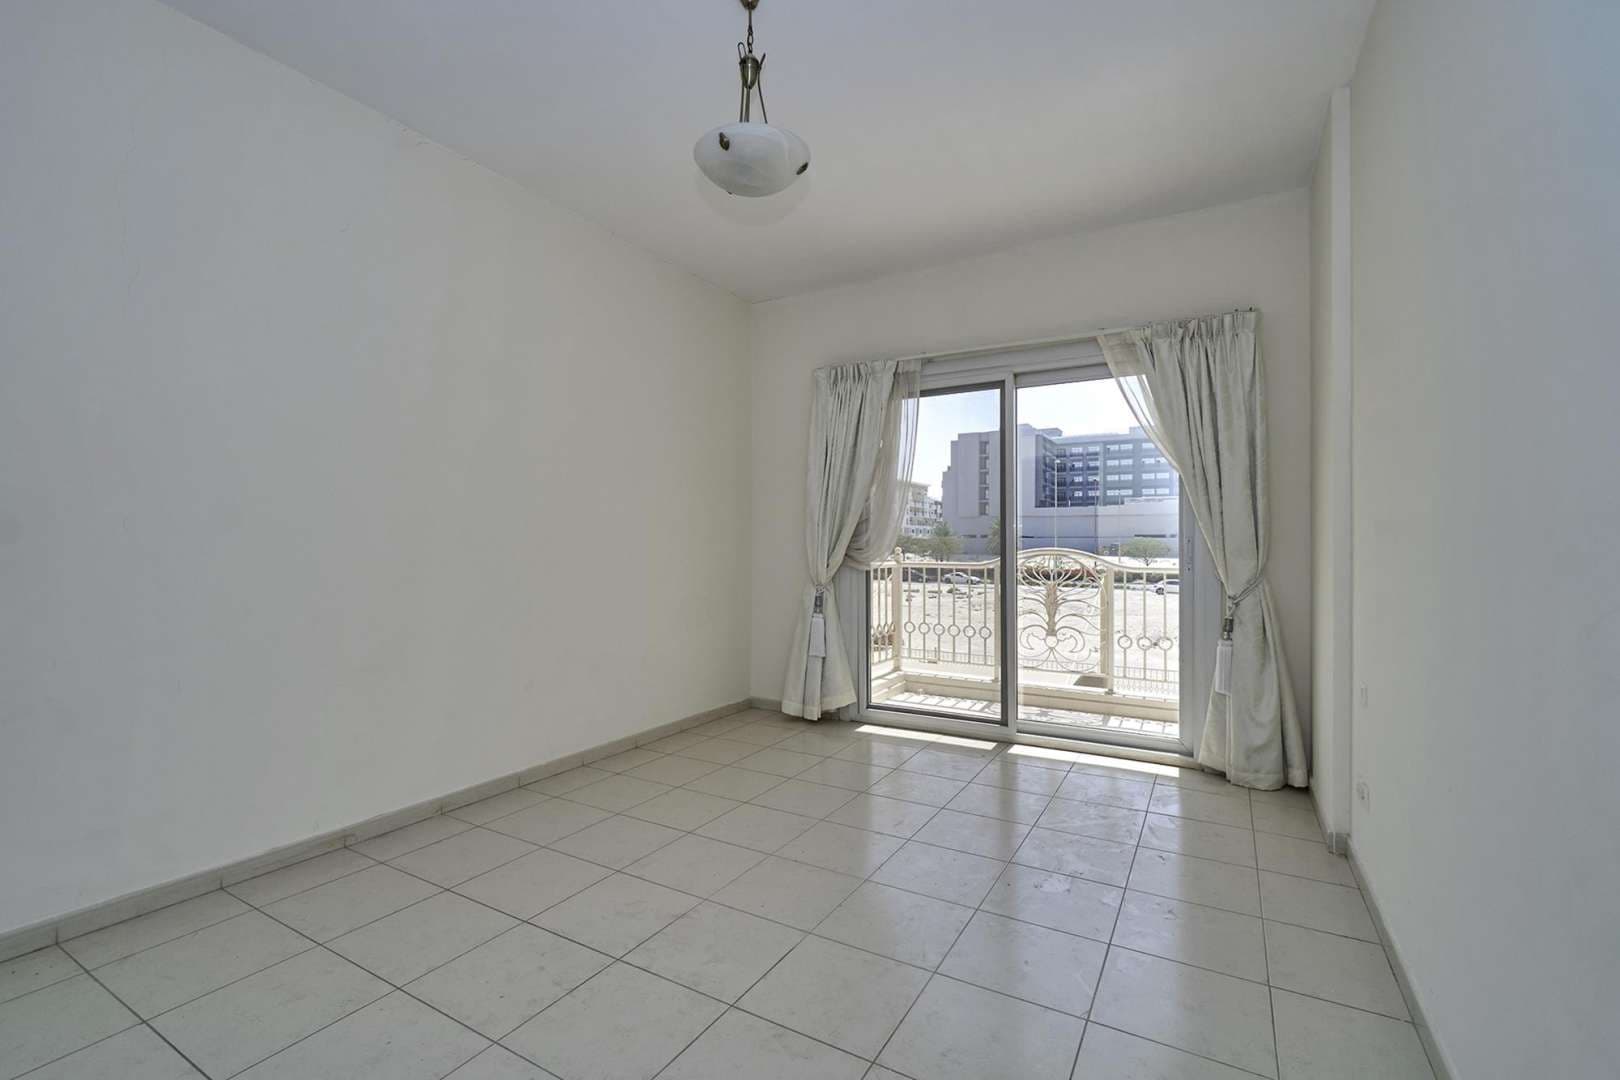 1 Bedroom Apartment For Rent Emirates Garden Lp06189 21abfb139a9a8600.jpg